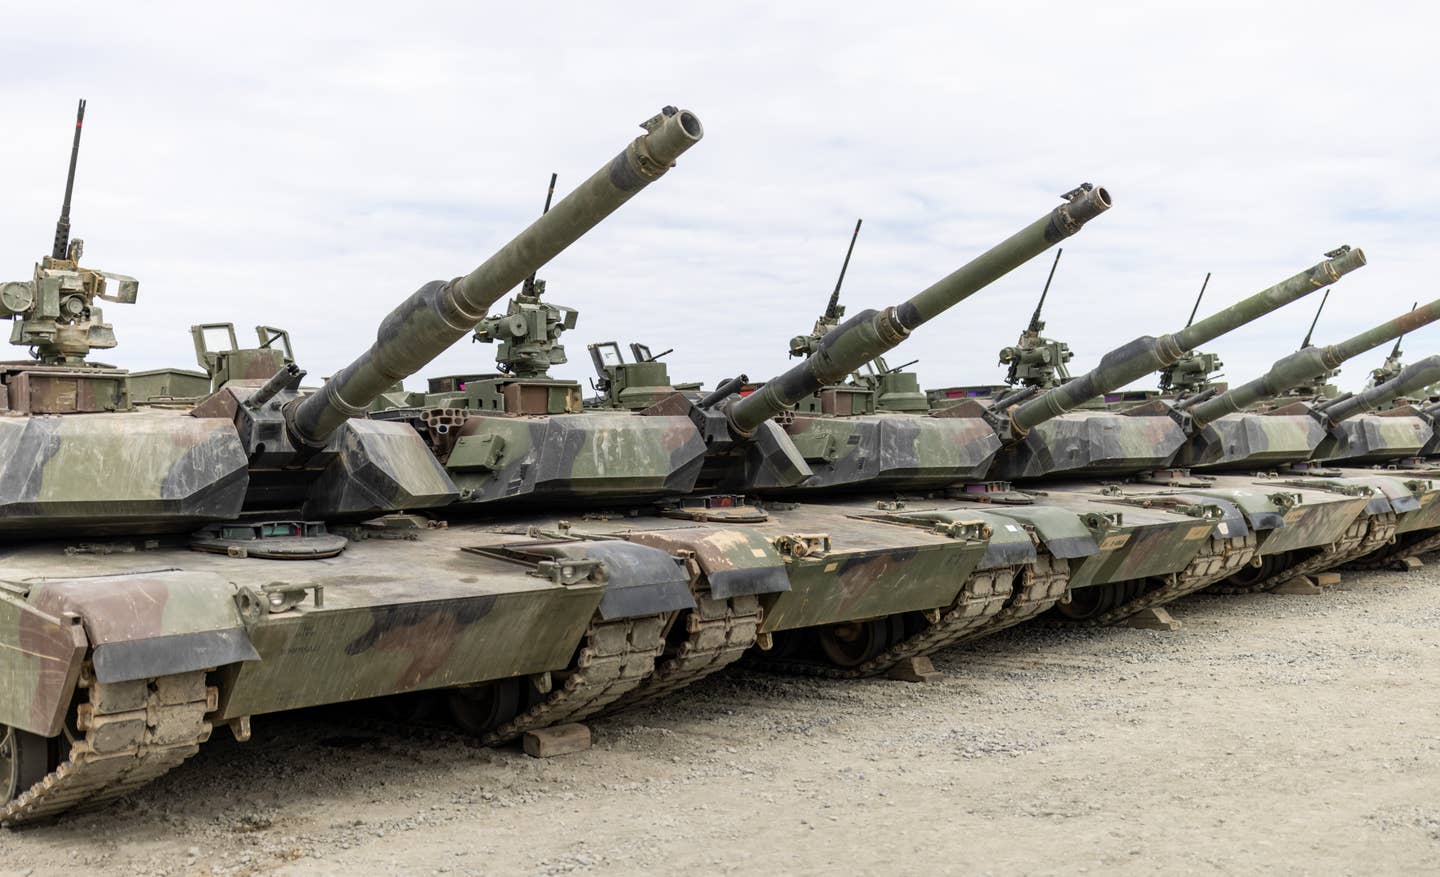 Abrams tanks stand on the grounds of the 1st Brigade of the 3rd Infantry Division (Raider Brigade) during a visit by the German president to U.S. forces in Grafenwoehr. (Photo by Daniel Karmann/picture alliance via Getty Images)